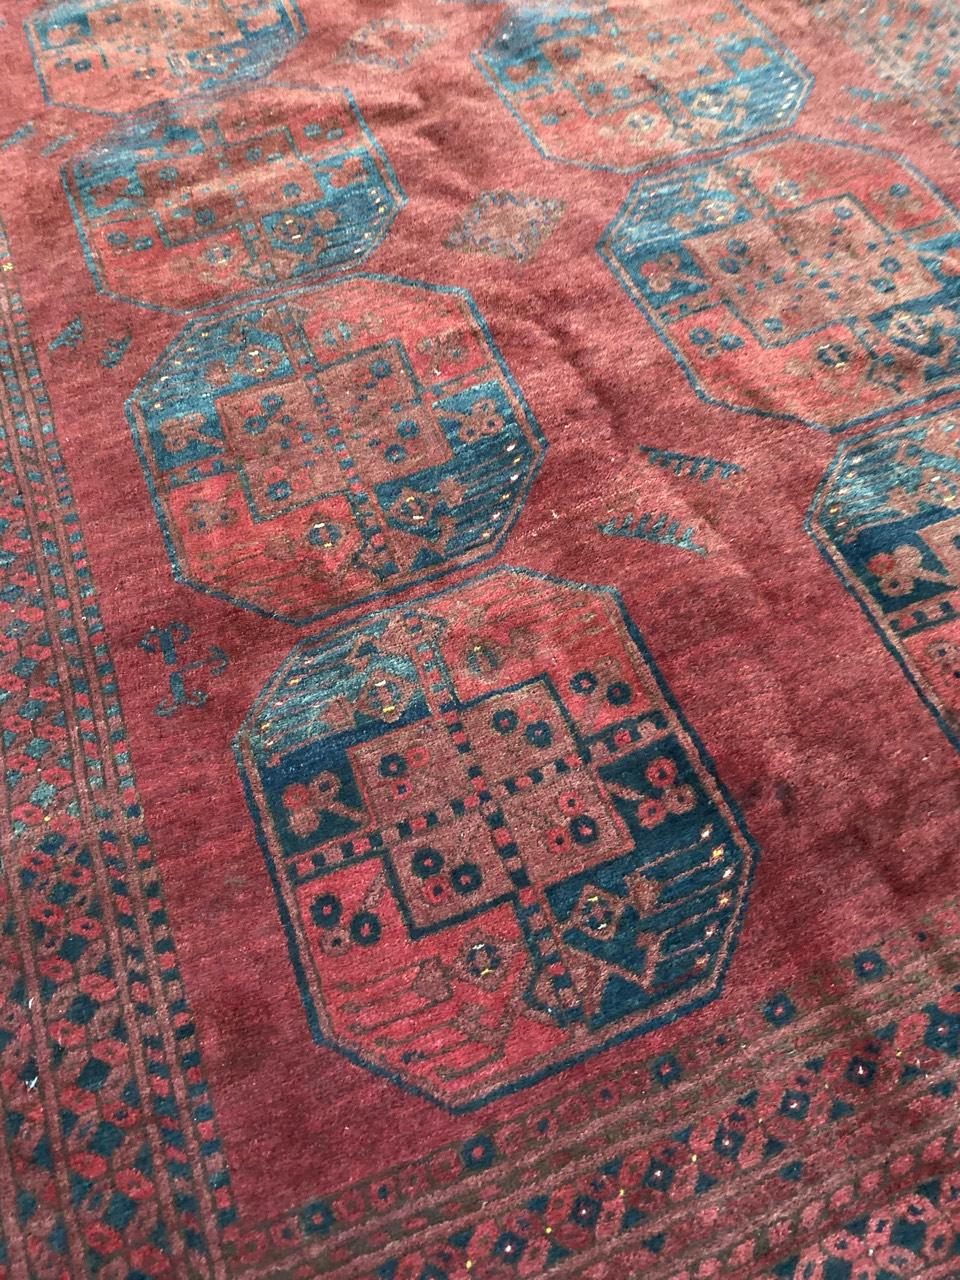 Nice Turkmen Afghan rug with beautiful geometrical design and red, brown and blue colors, entirely hand knotted with wool velvet on wool foundation.

✨✨✨
